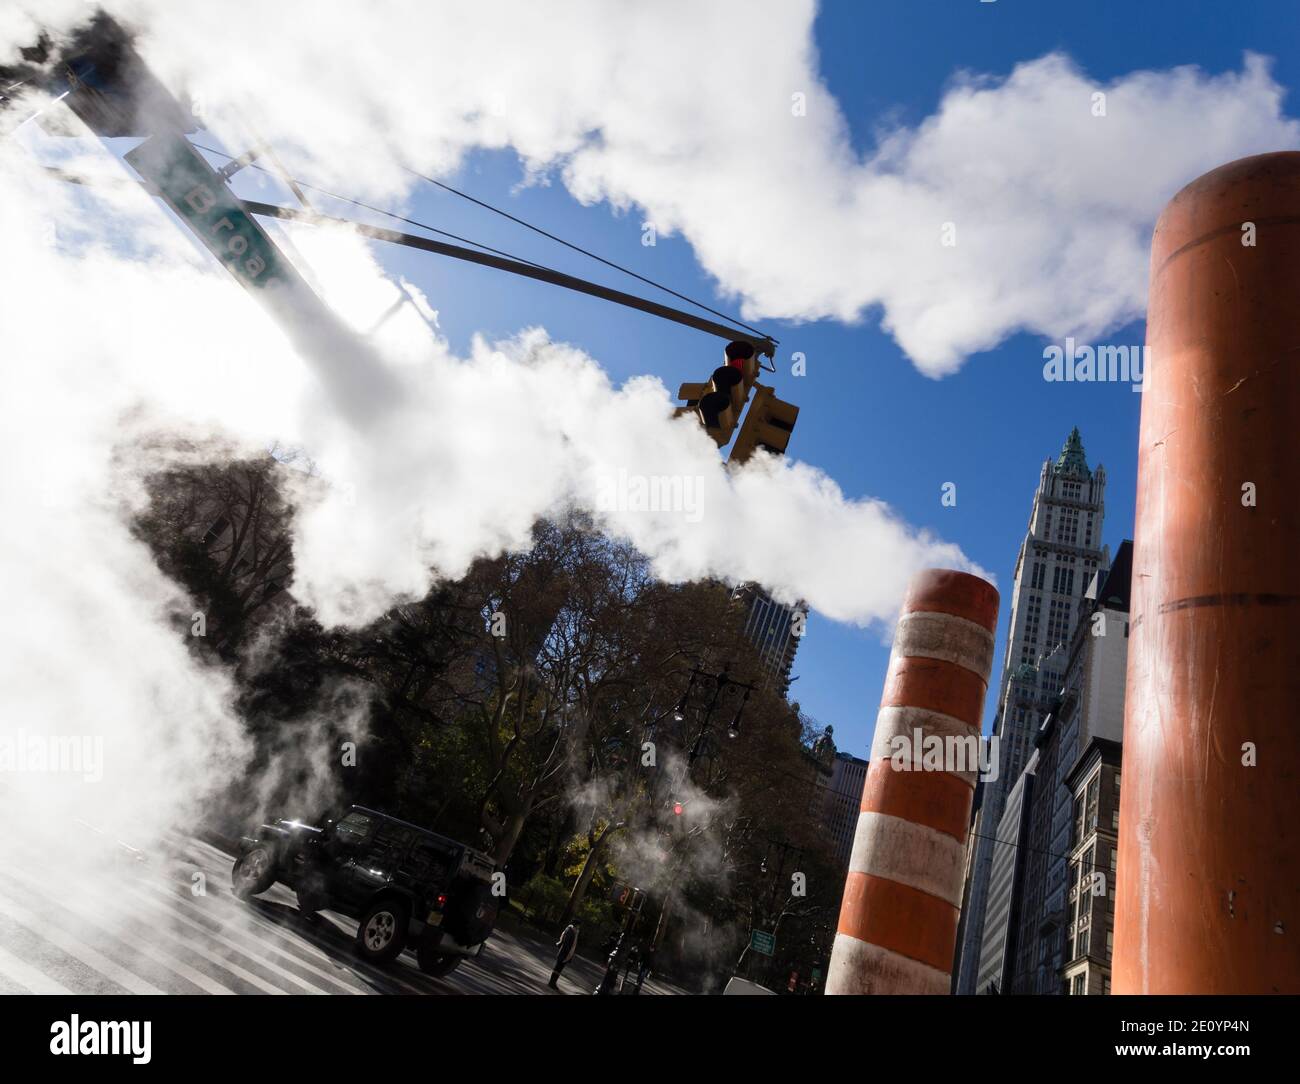 New York City, NY (USA) - 16 November 2019: Steam vapor is raising from the New York City steam systems at a corner of Broadway, NYC. Stock Photo